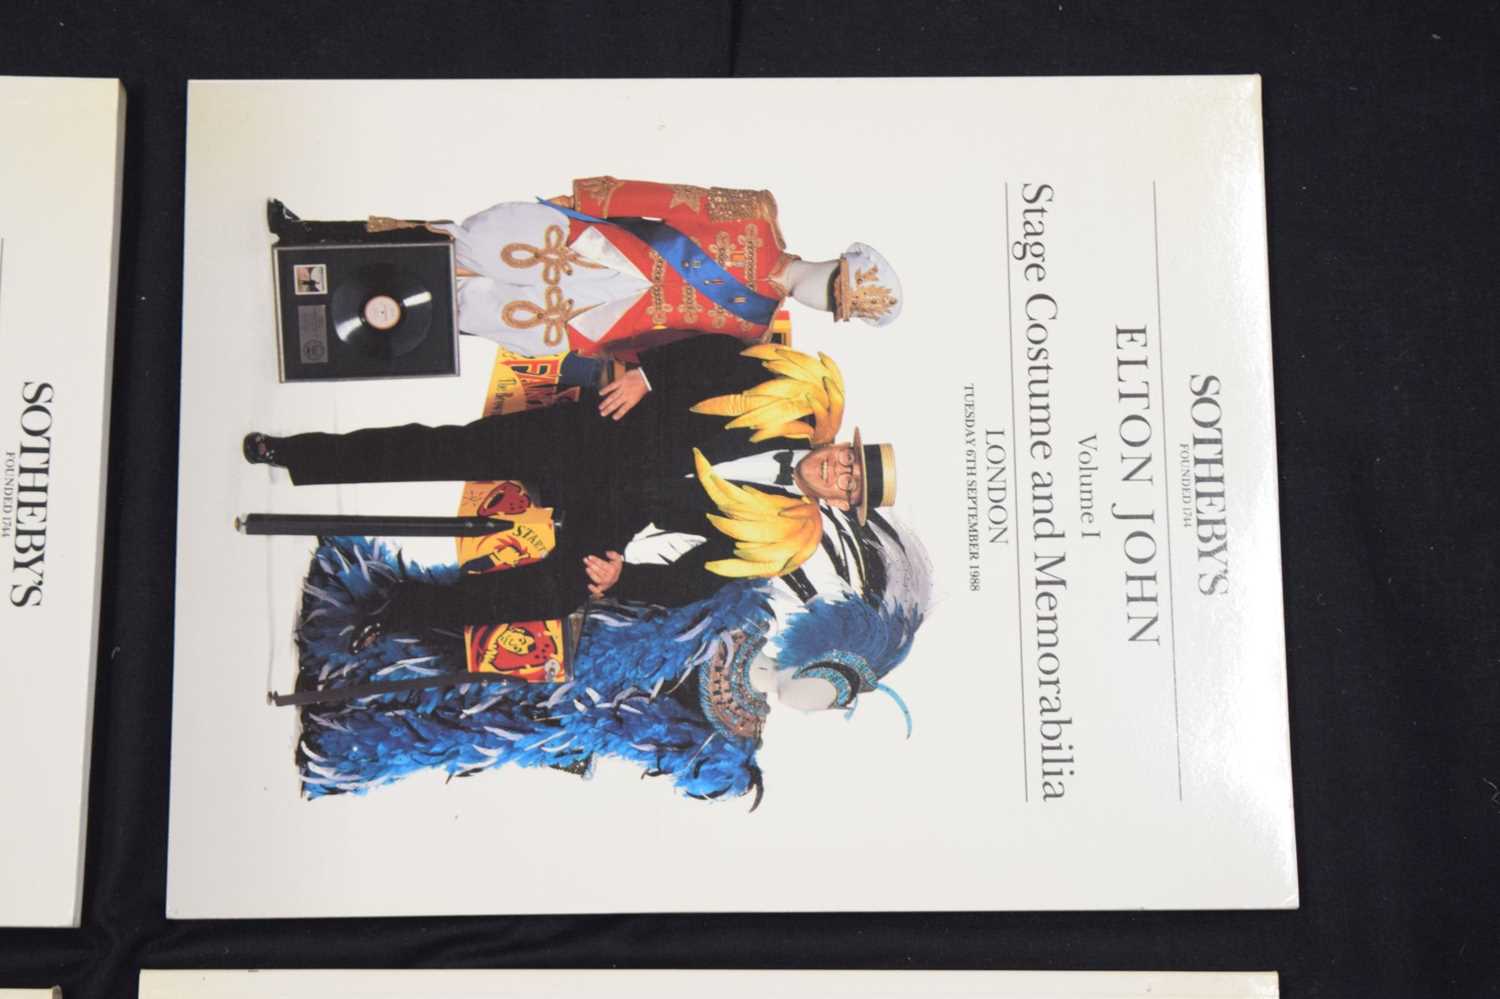 Sotheby's Elton John auction catalogue set from 6th-9th September 1988 - Image 6 of 9